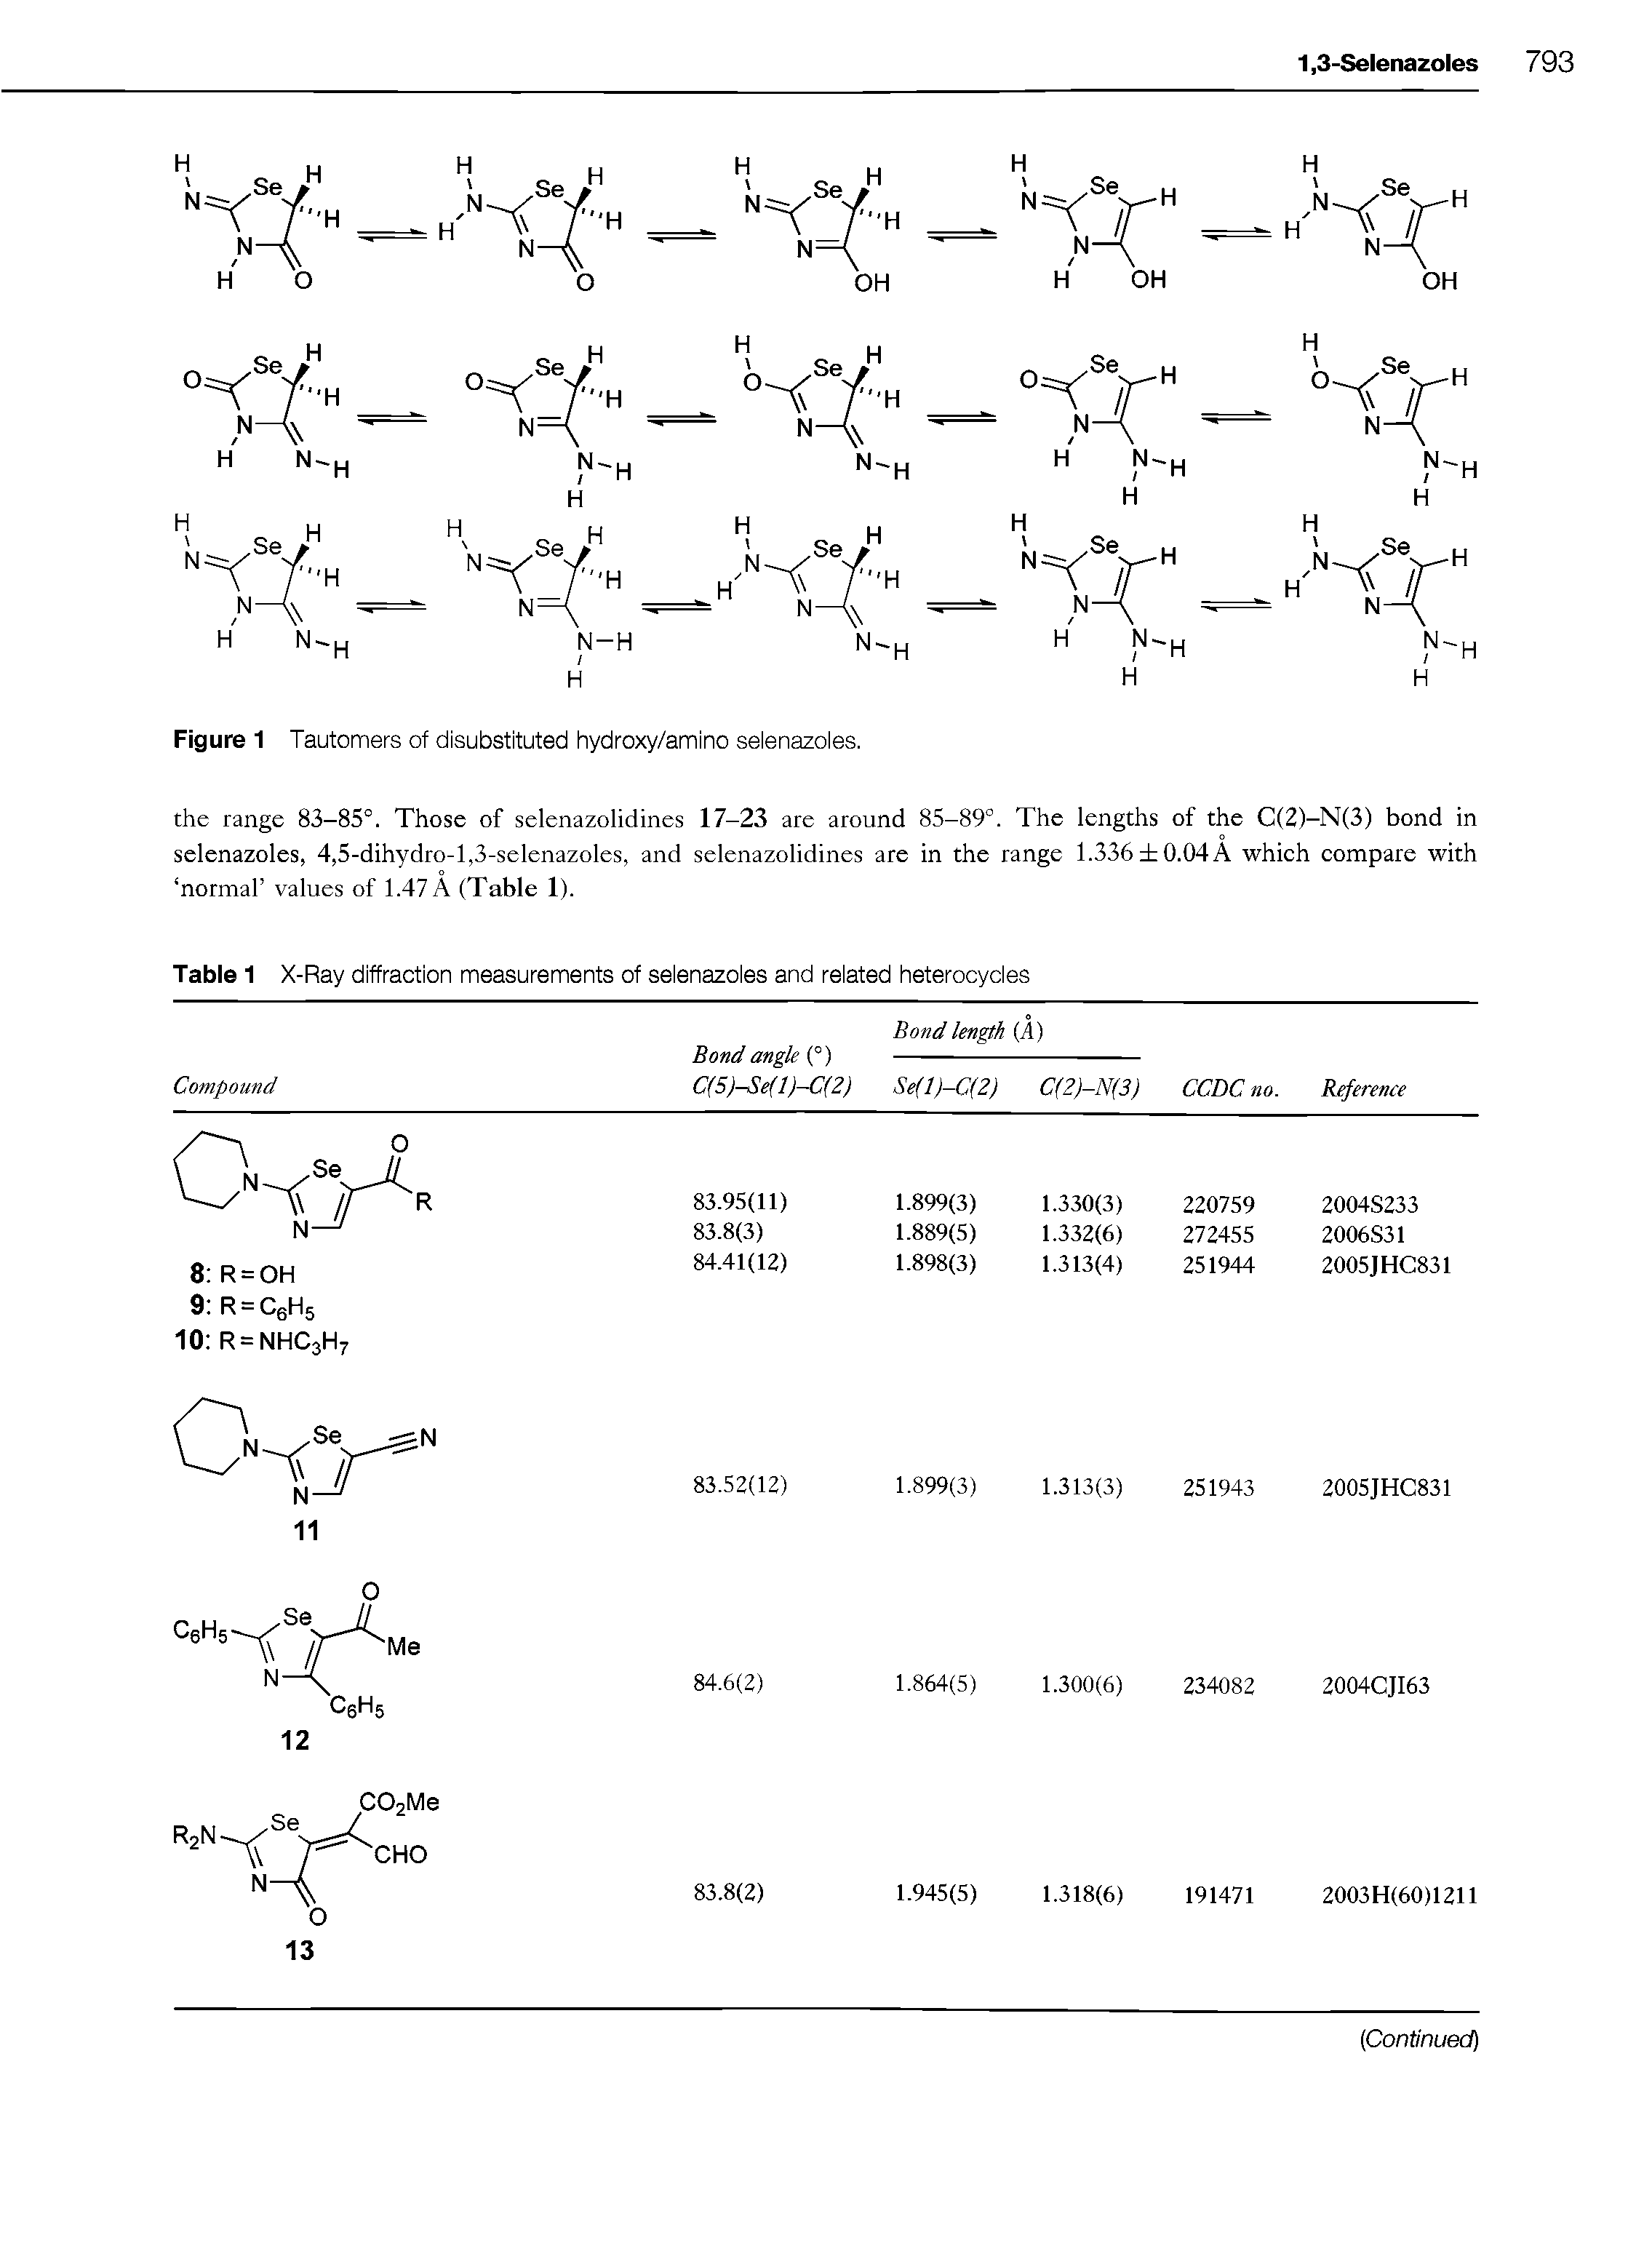 Figure 1 Tautomers of disubstituted hydroxy/amino selenazoles.